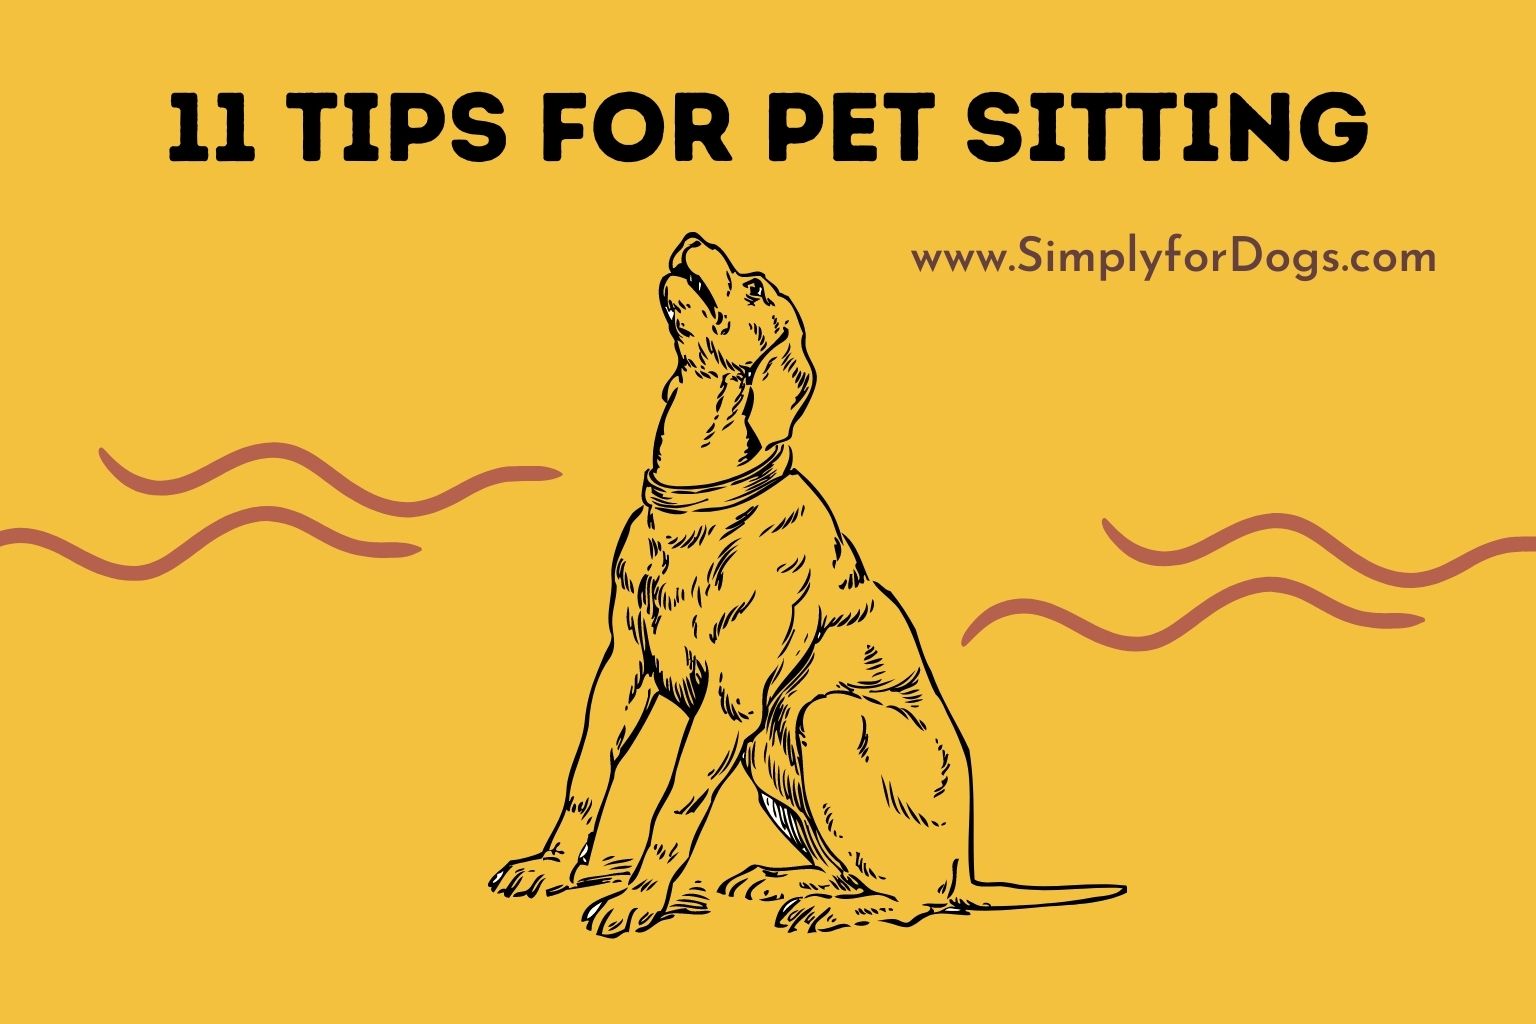 tips-for-pet-sitting-services-know-before-approach-simply-for-dogs